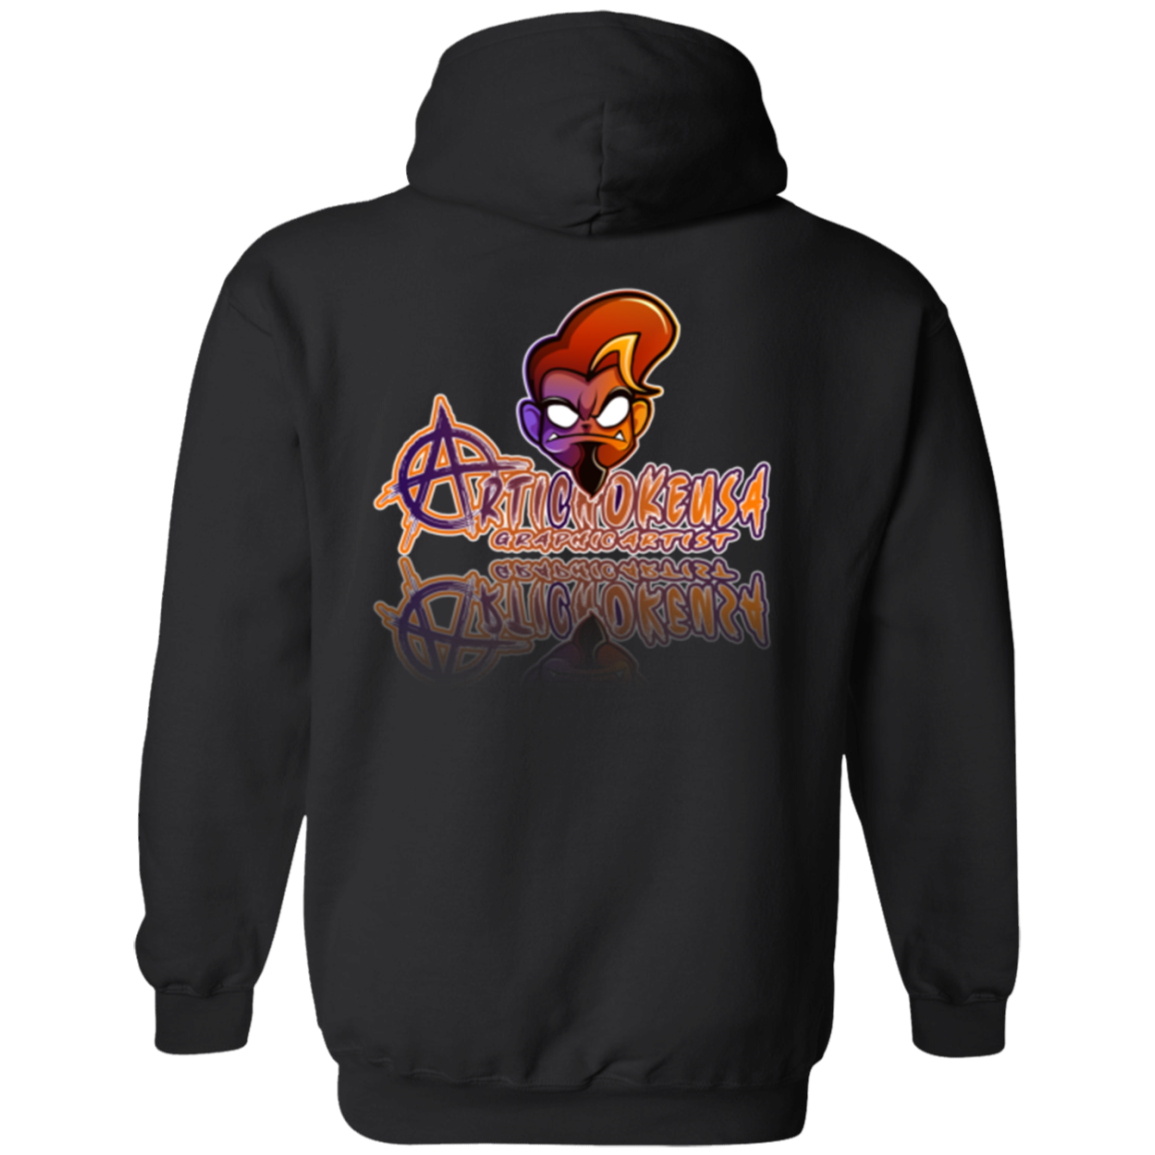 ArtichokeUSA Character & Font Design #1. Let's Design Your Own Design Today. Basic Pullover Hoodie